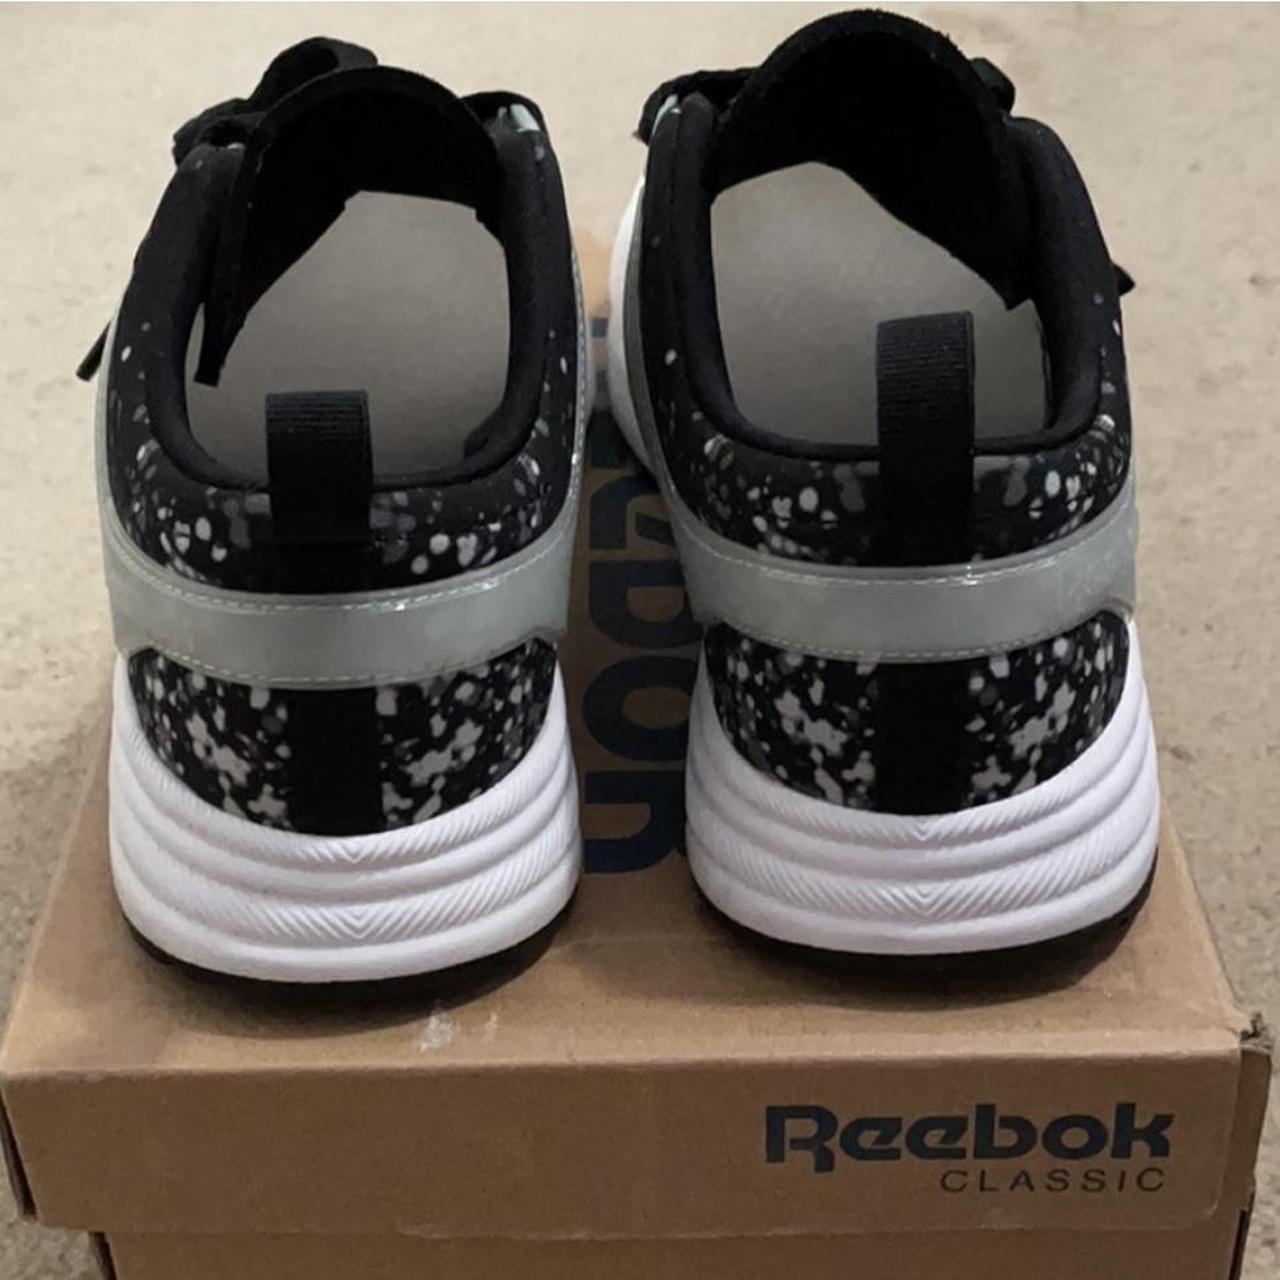 Reebok Women's Black and White Trainers (3)